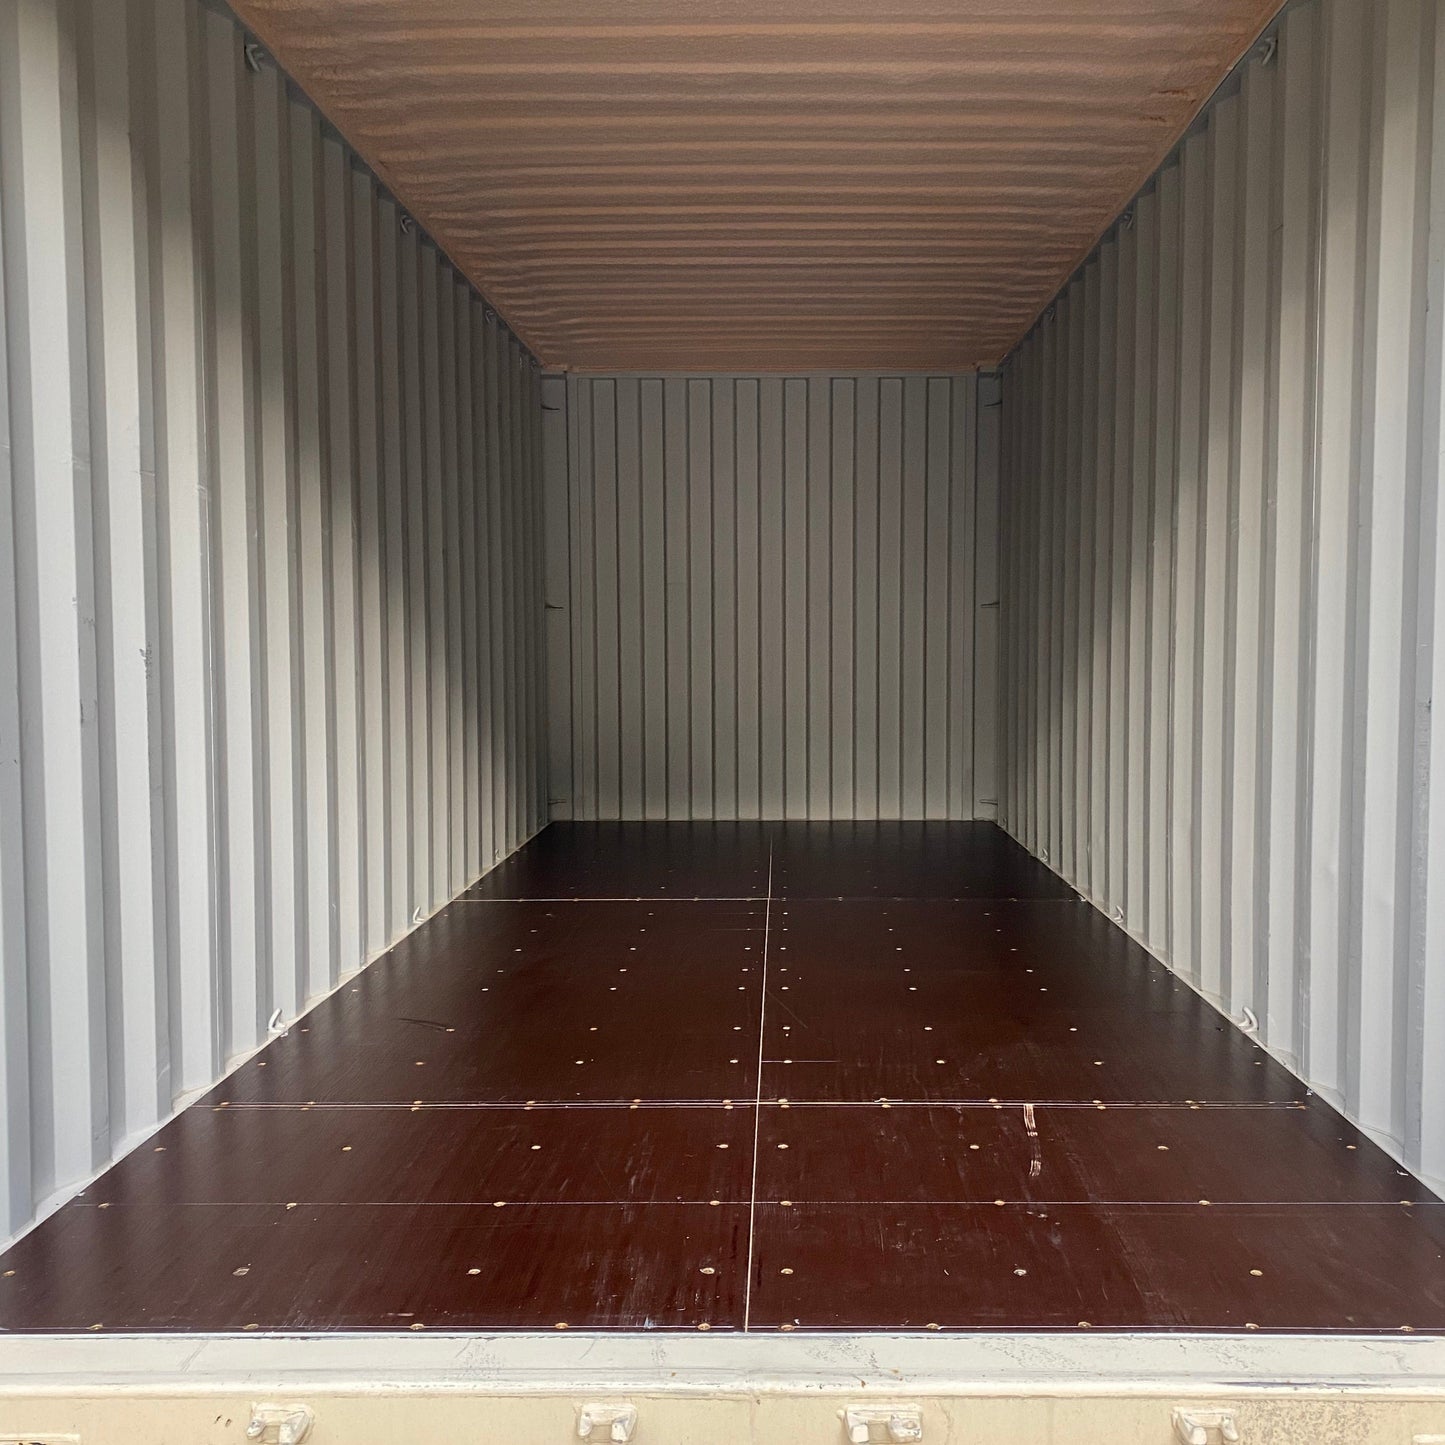 Rent New 40-Foot Shipping Container